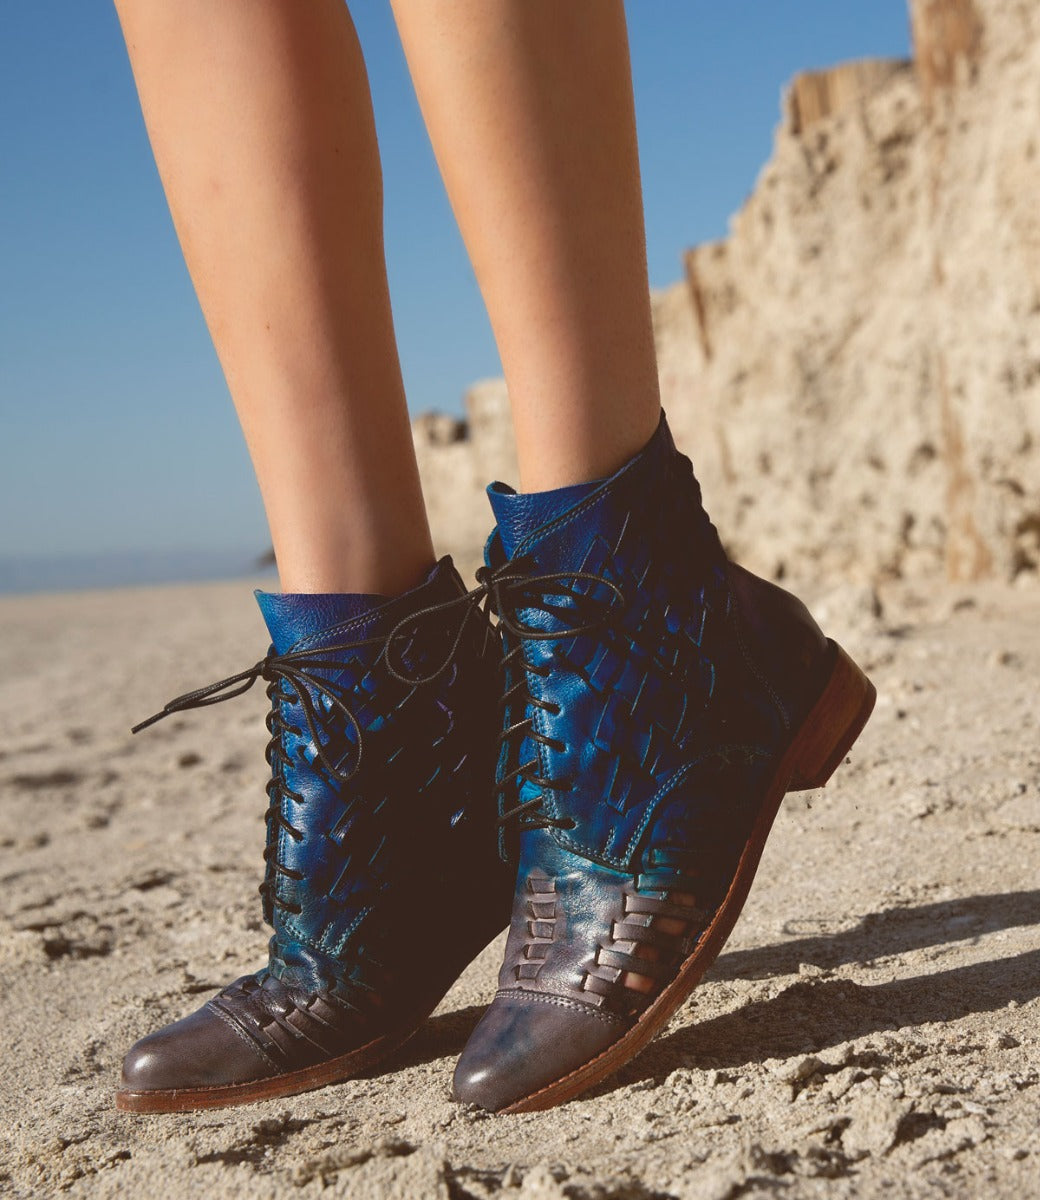 A woman wearing a pair of blue lace up Bed Stu Loretta boots on the beach.